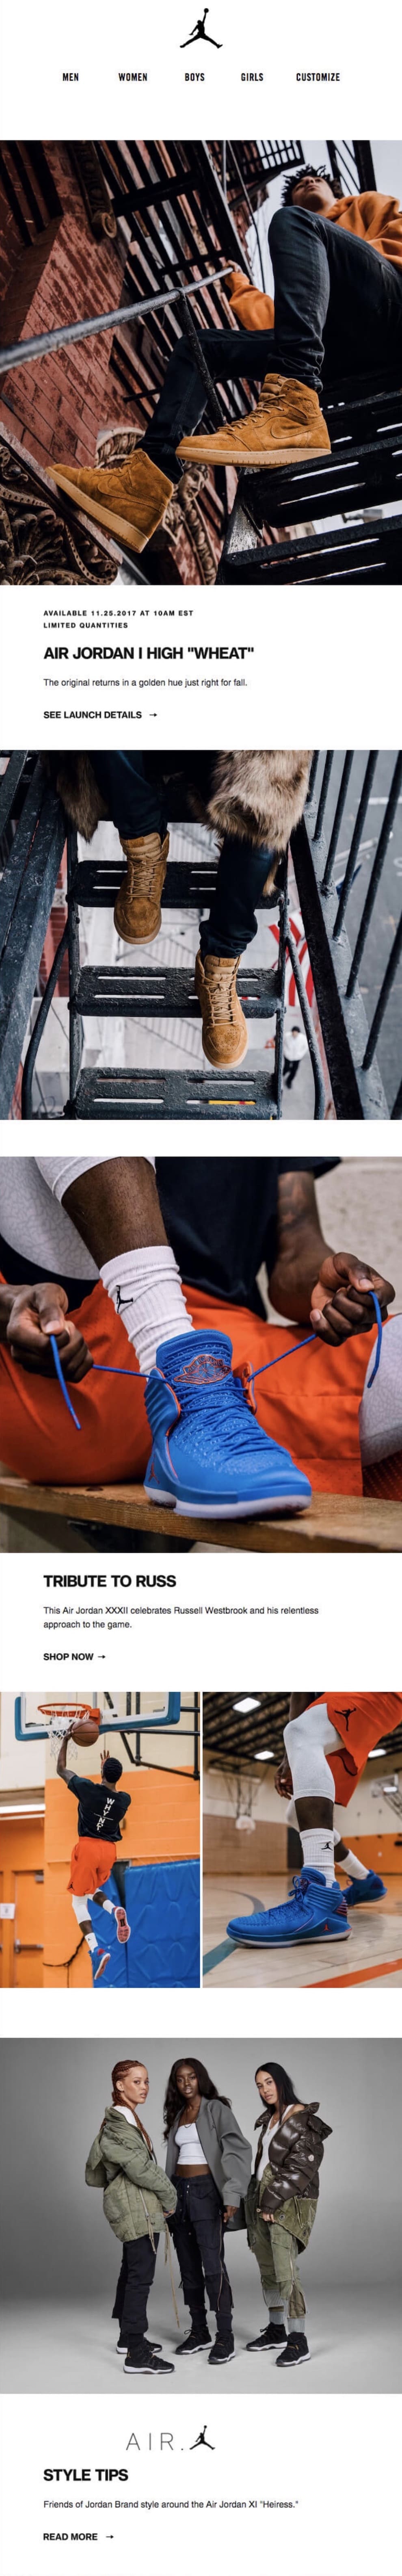 influencer marketing at work in an email marketing campaign for Air Jordans, named after the basketball player himself